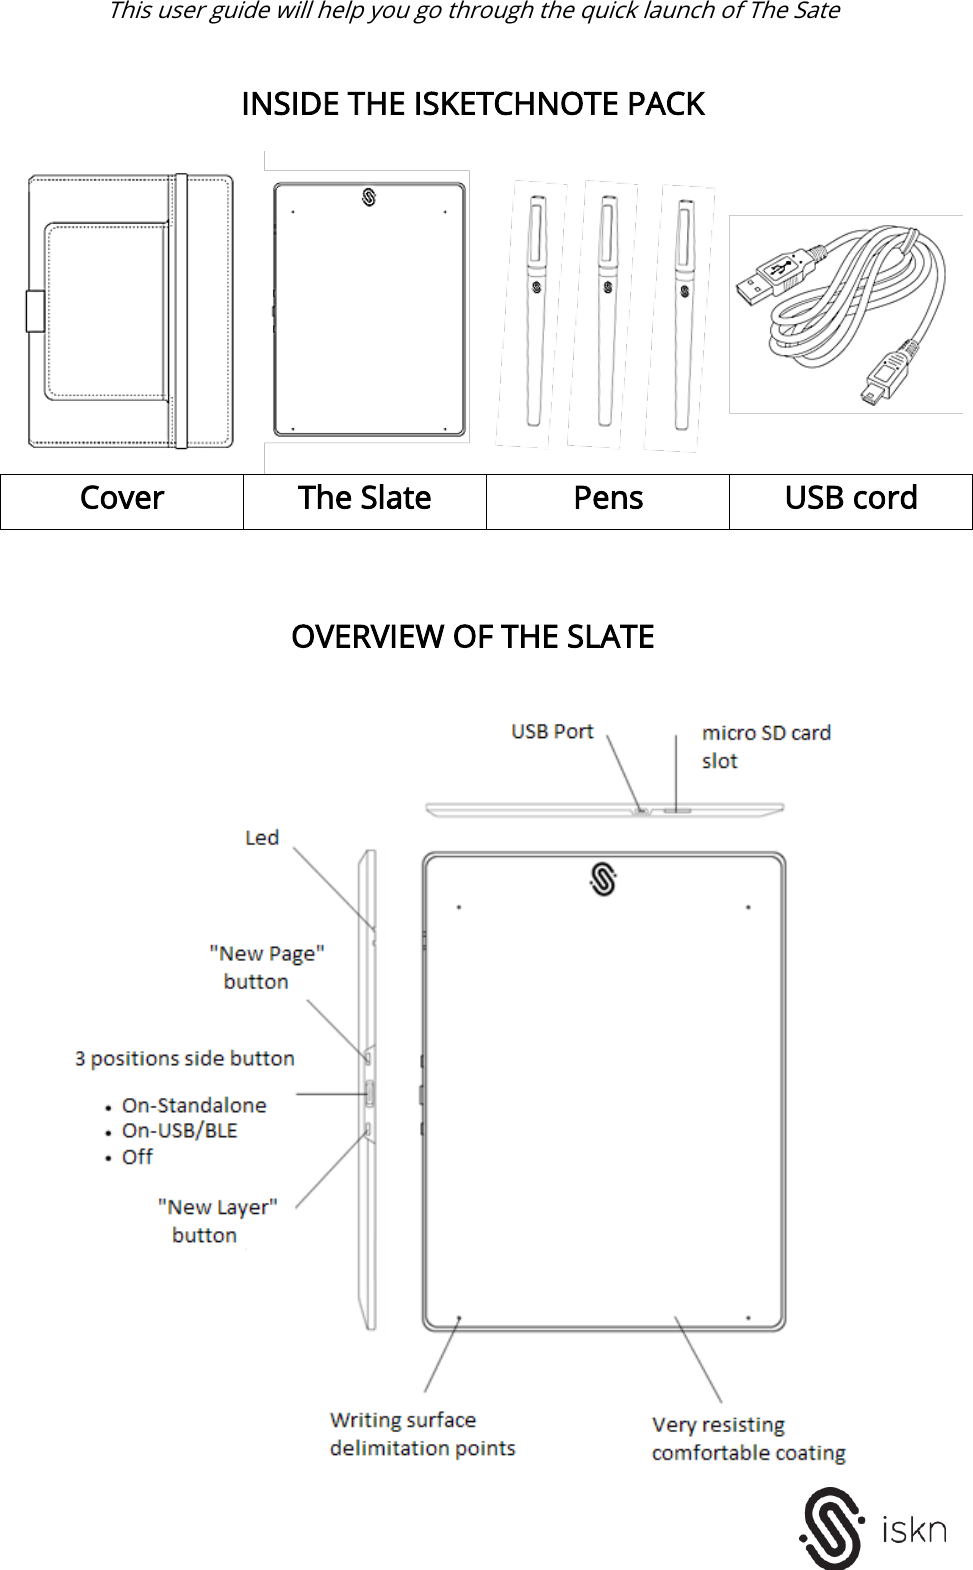  This user guide will help you go through the quick launch of The Sate    INSIDE THE ISKETCHNOTE PACK   Cover The Slate Pens USB cord    OVERVIEW OF THE SLATE    